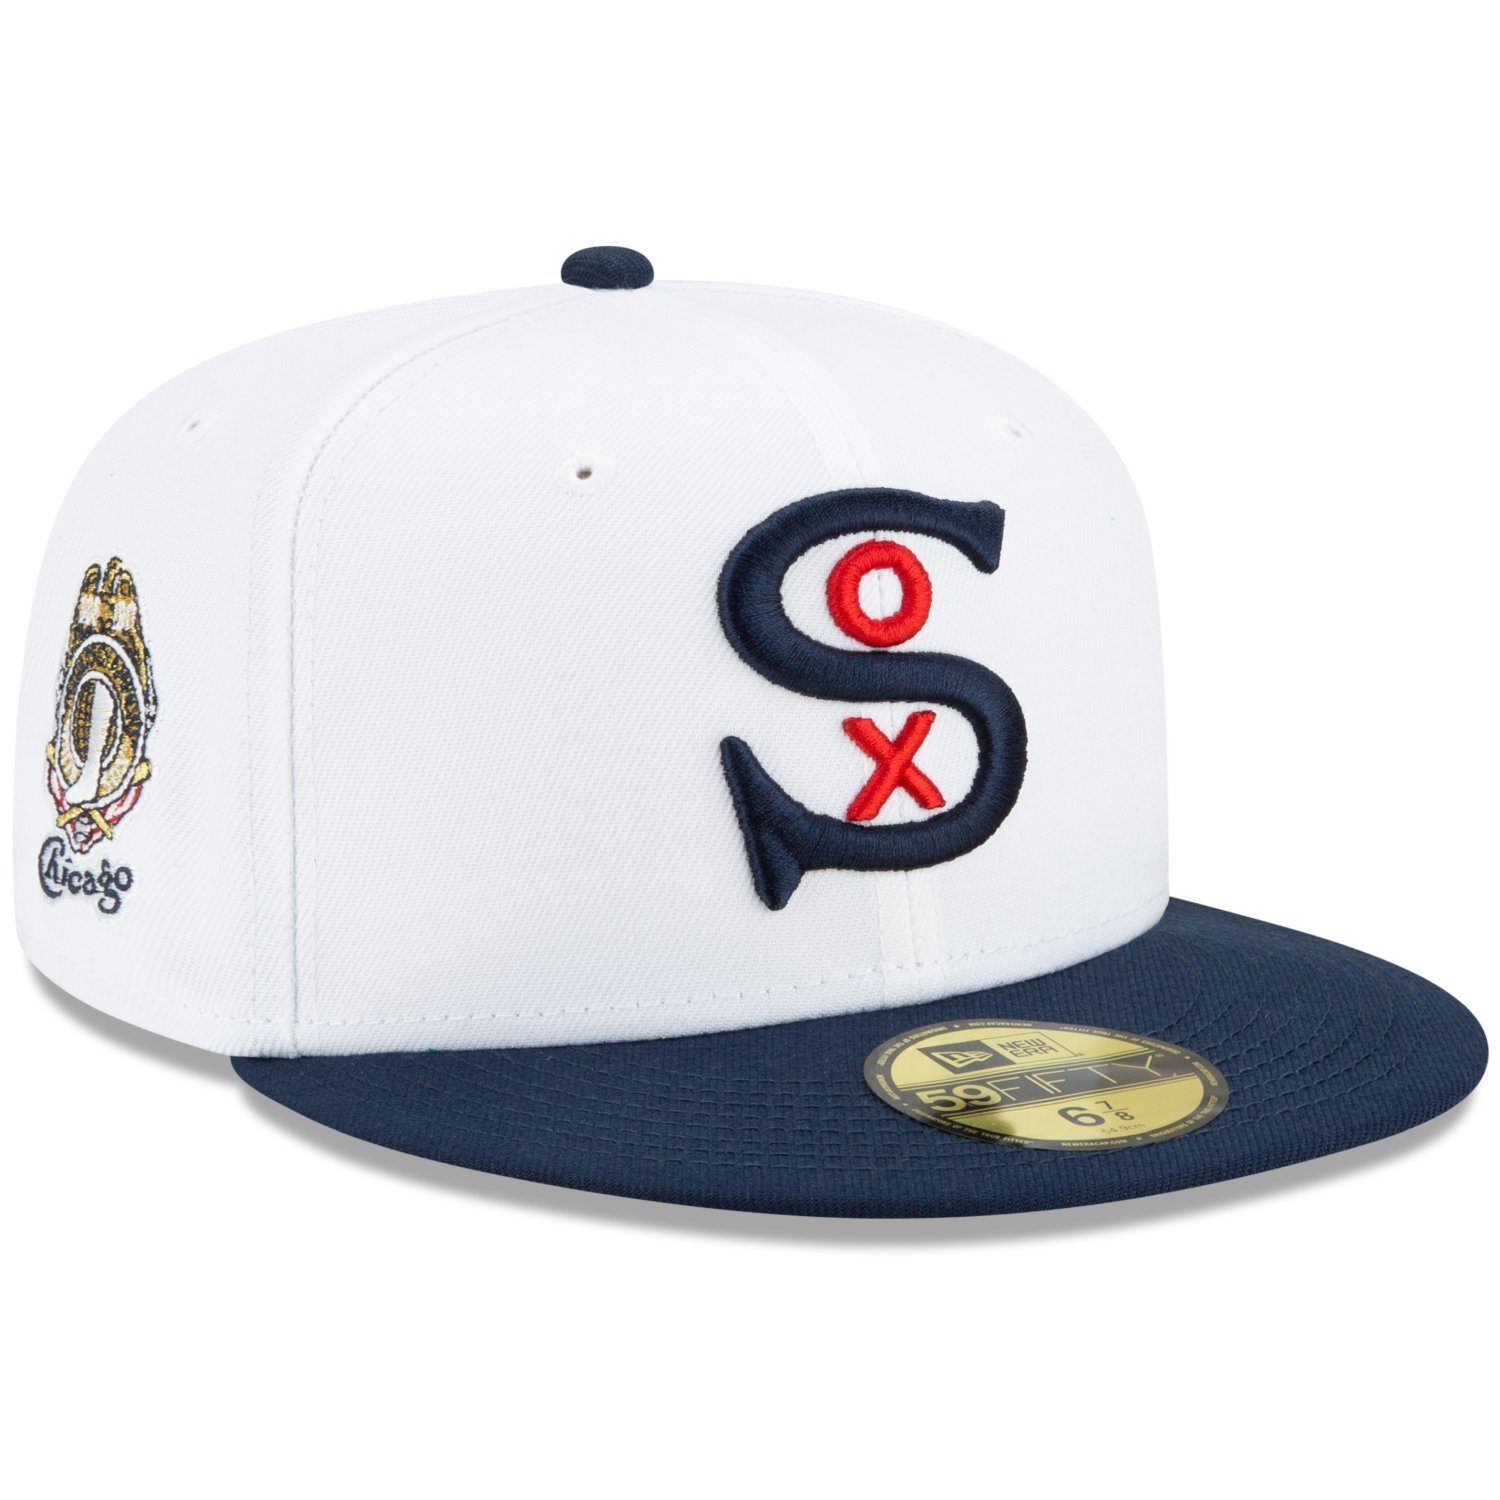 New Era Fitted Cap 59Fifty Chicago WORLD SERIES Sox White